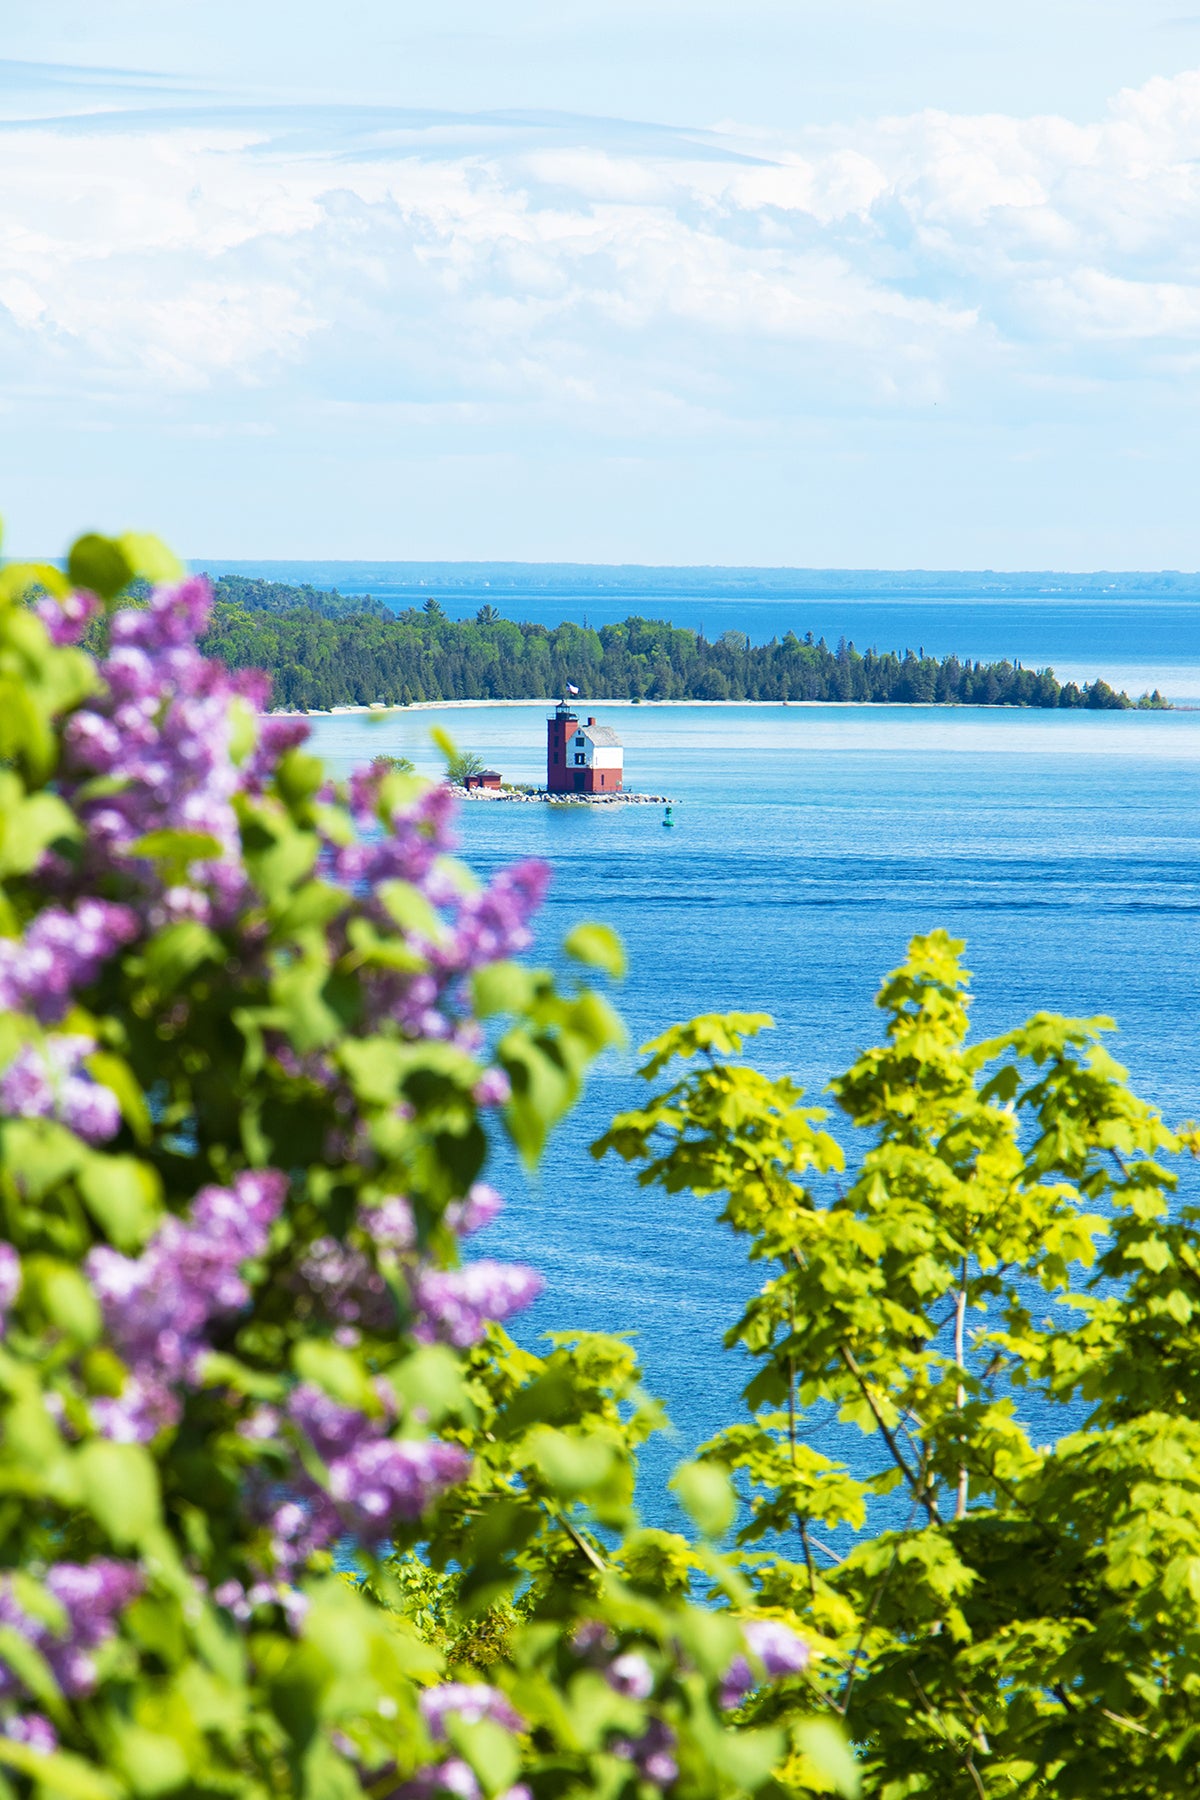 Mackinac:  Lilac View of Round Island (Portrait) Greeting Card.A casually elegant greeting card designed to be shared or displayed as a work of art.  